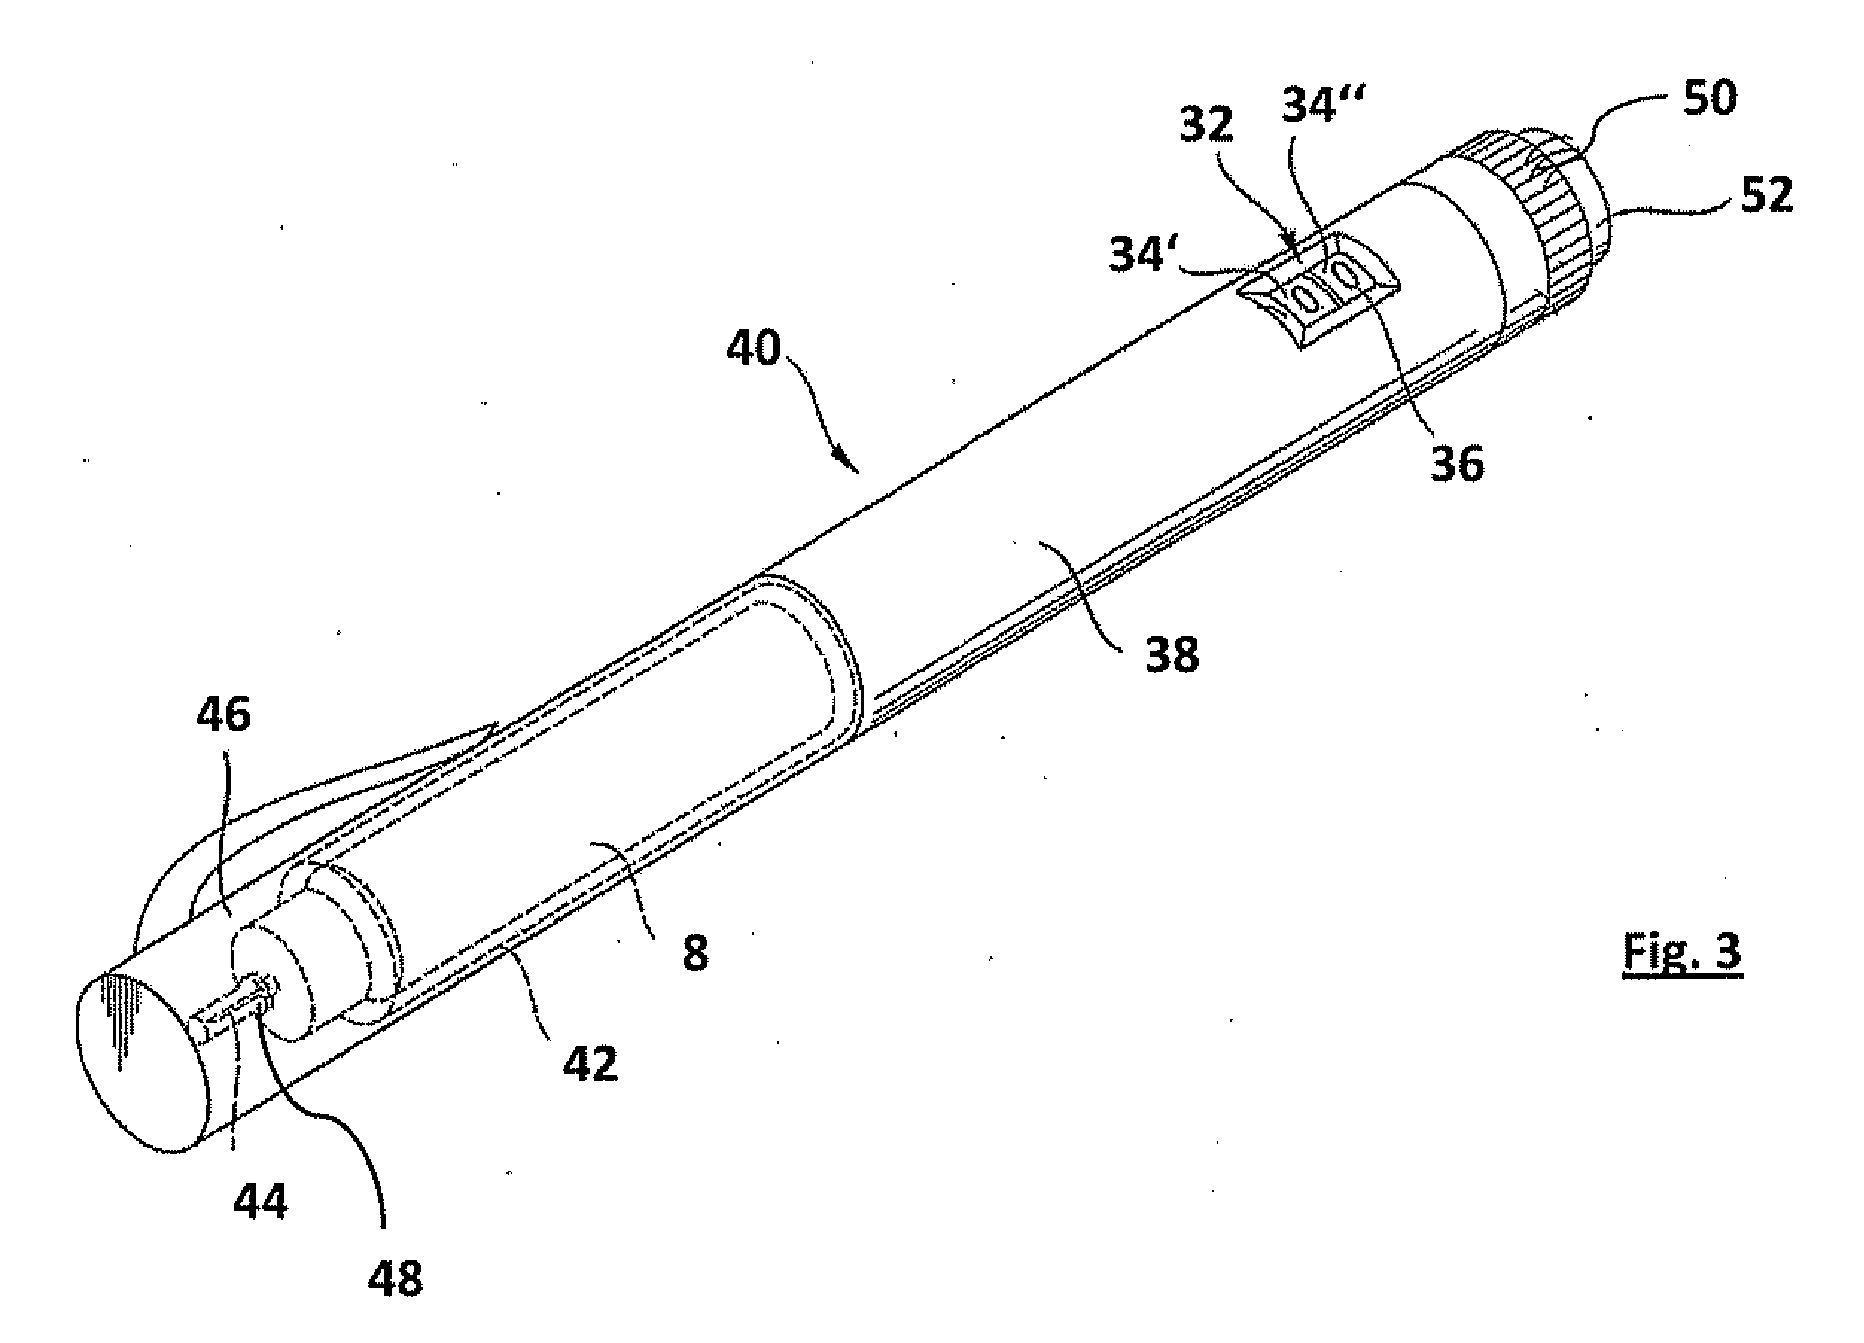 Drug Delivery Device and Associated Packaging